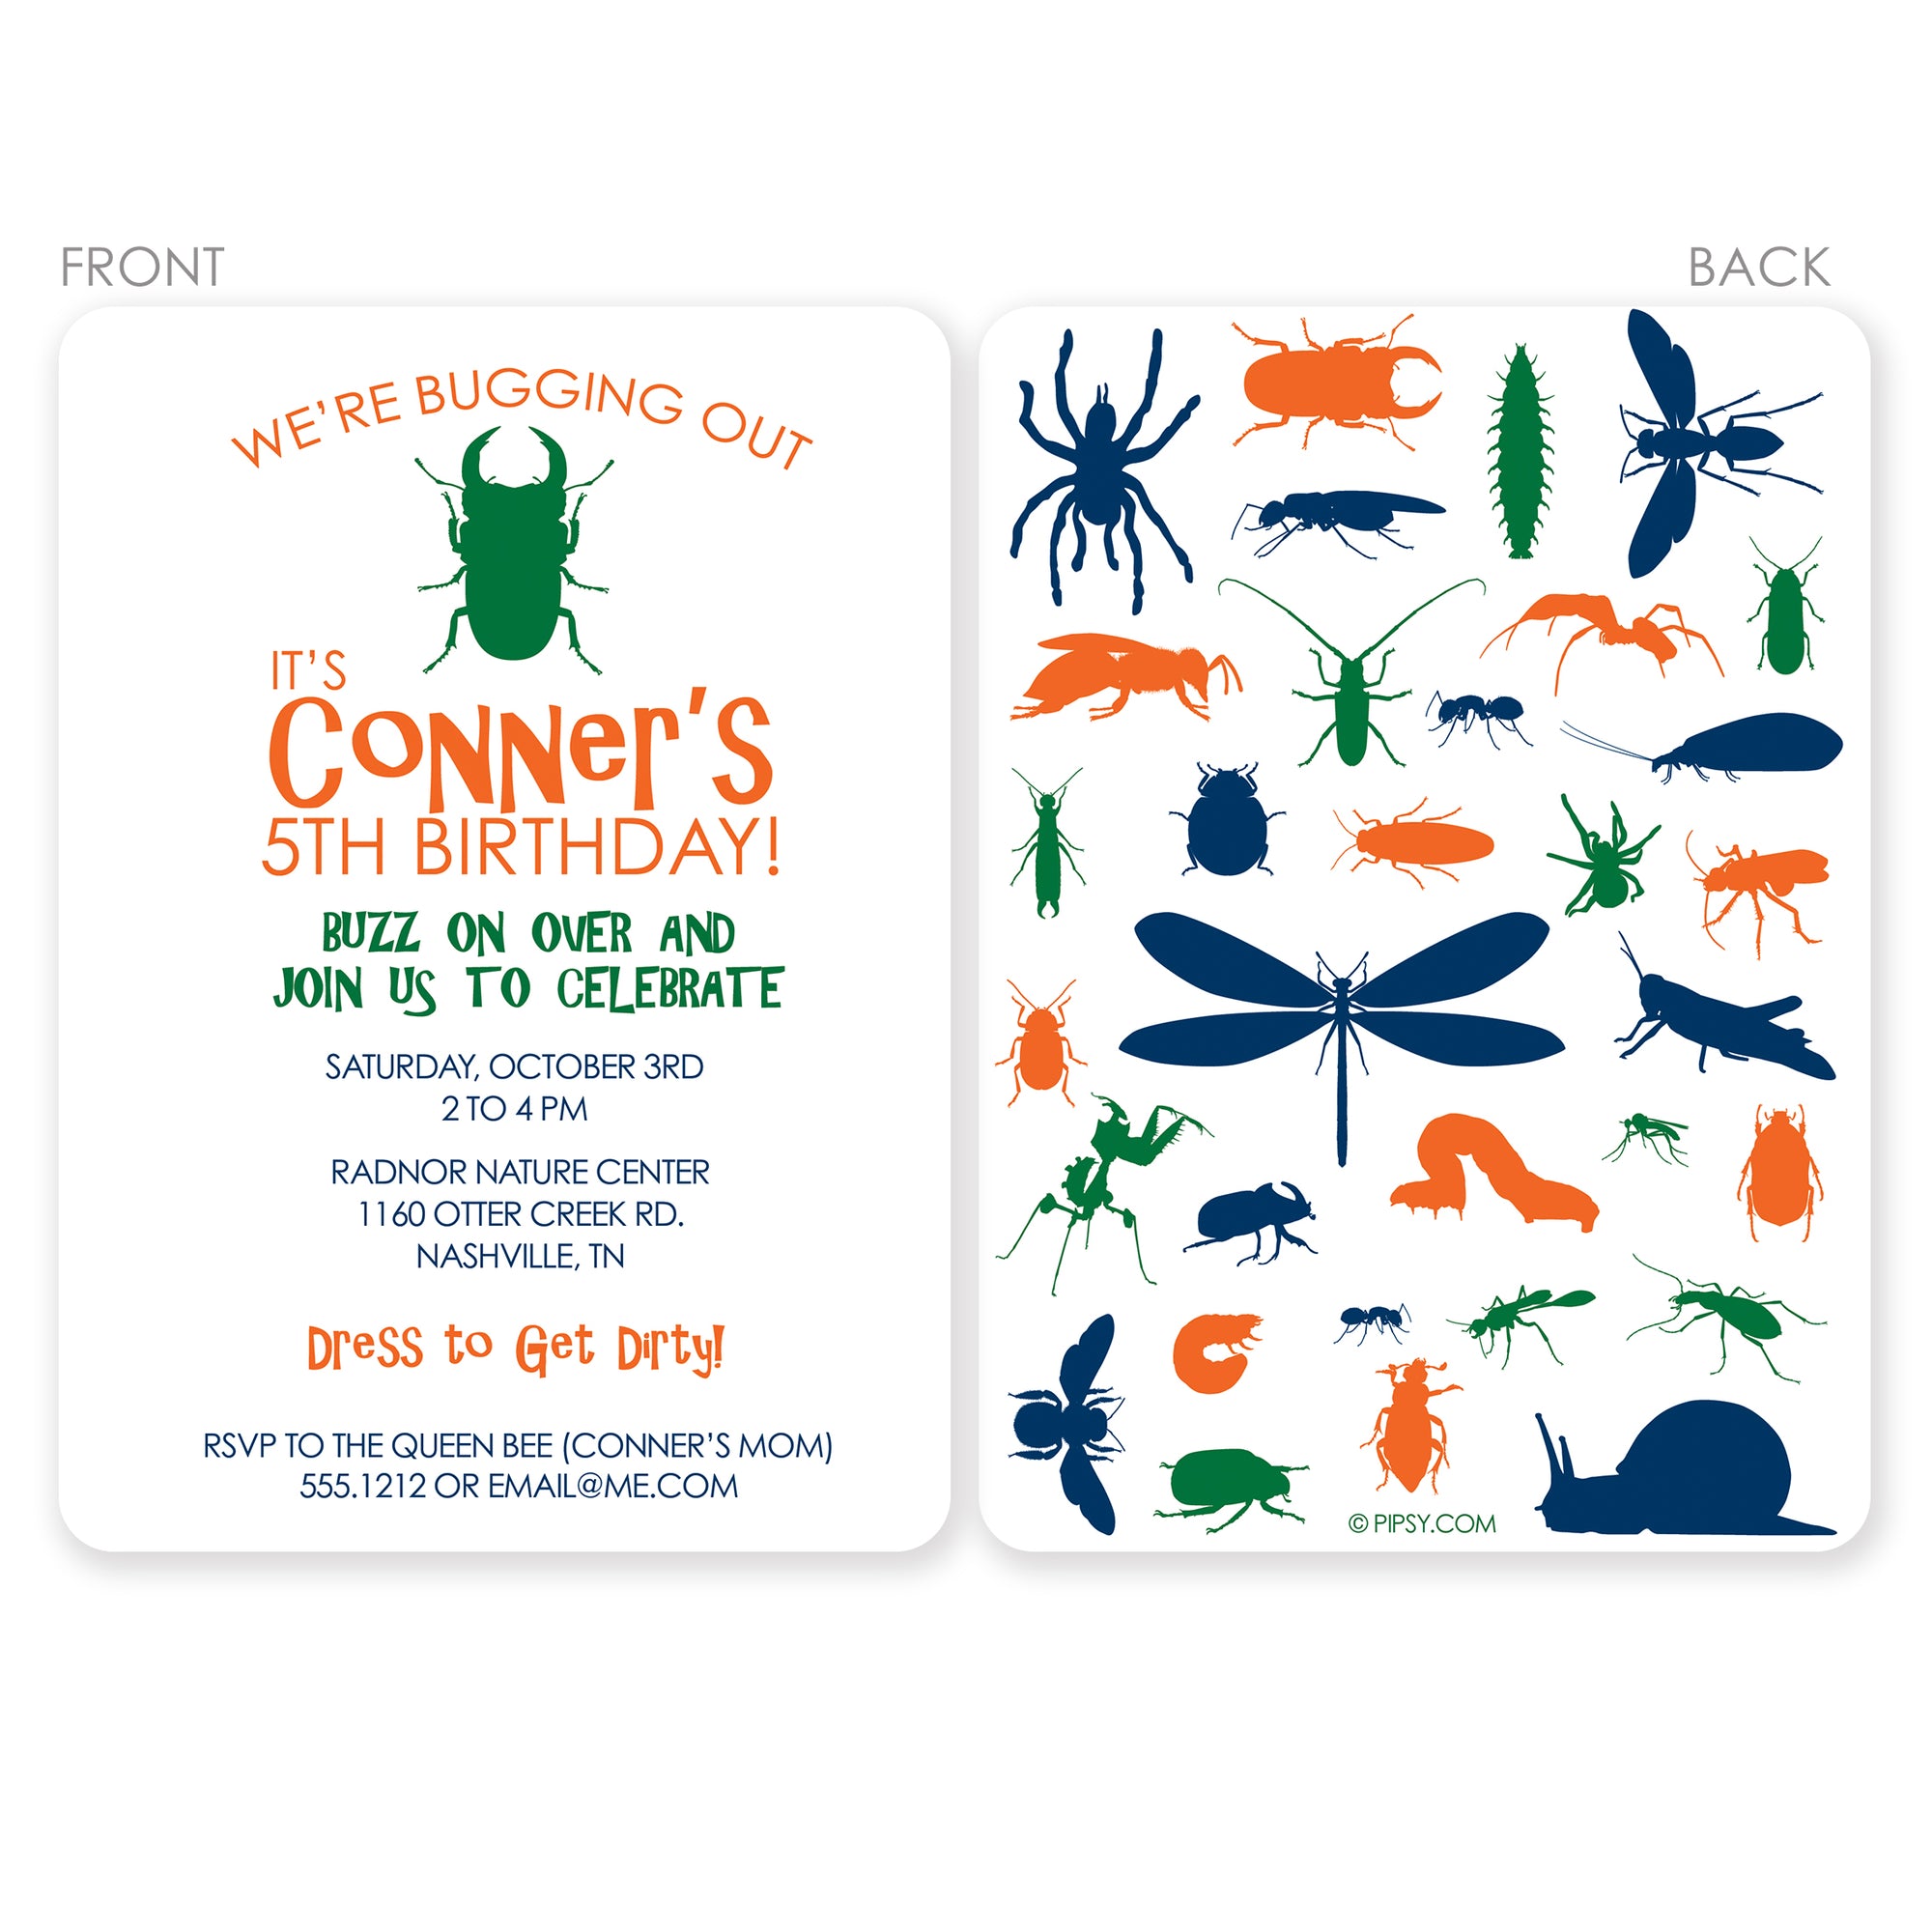 Bug Birthday Invitation featuring an assortment of insects and spiders. Great for a party at a nature center. Printed on thick cardstock, with 2 sided printing, rounded corners. Includes envelopes, 